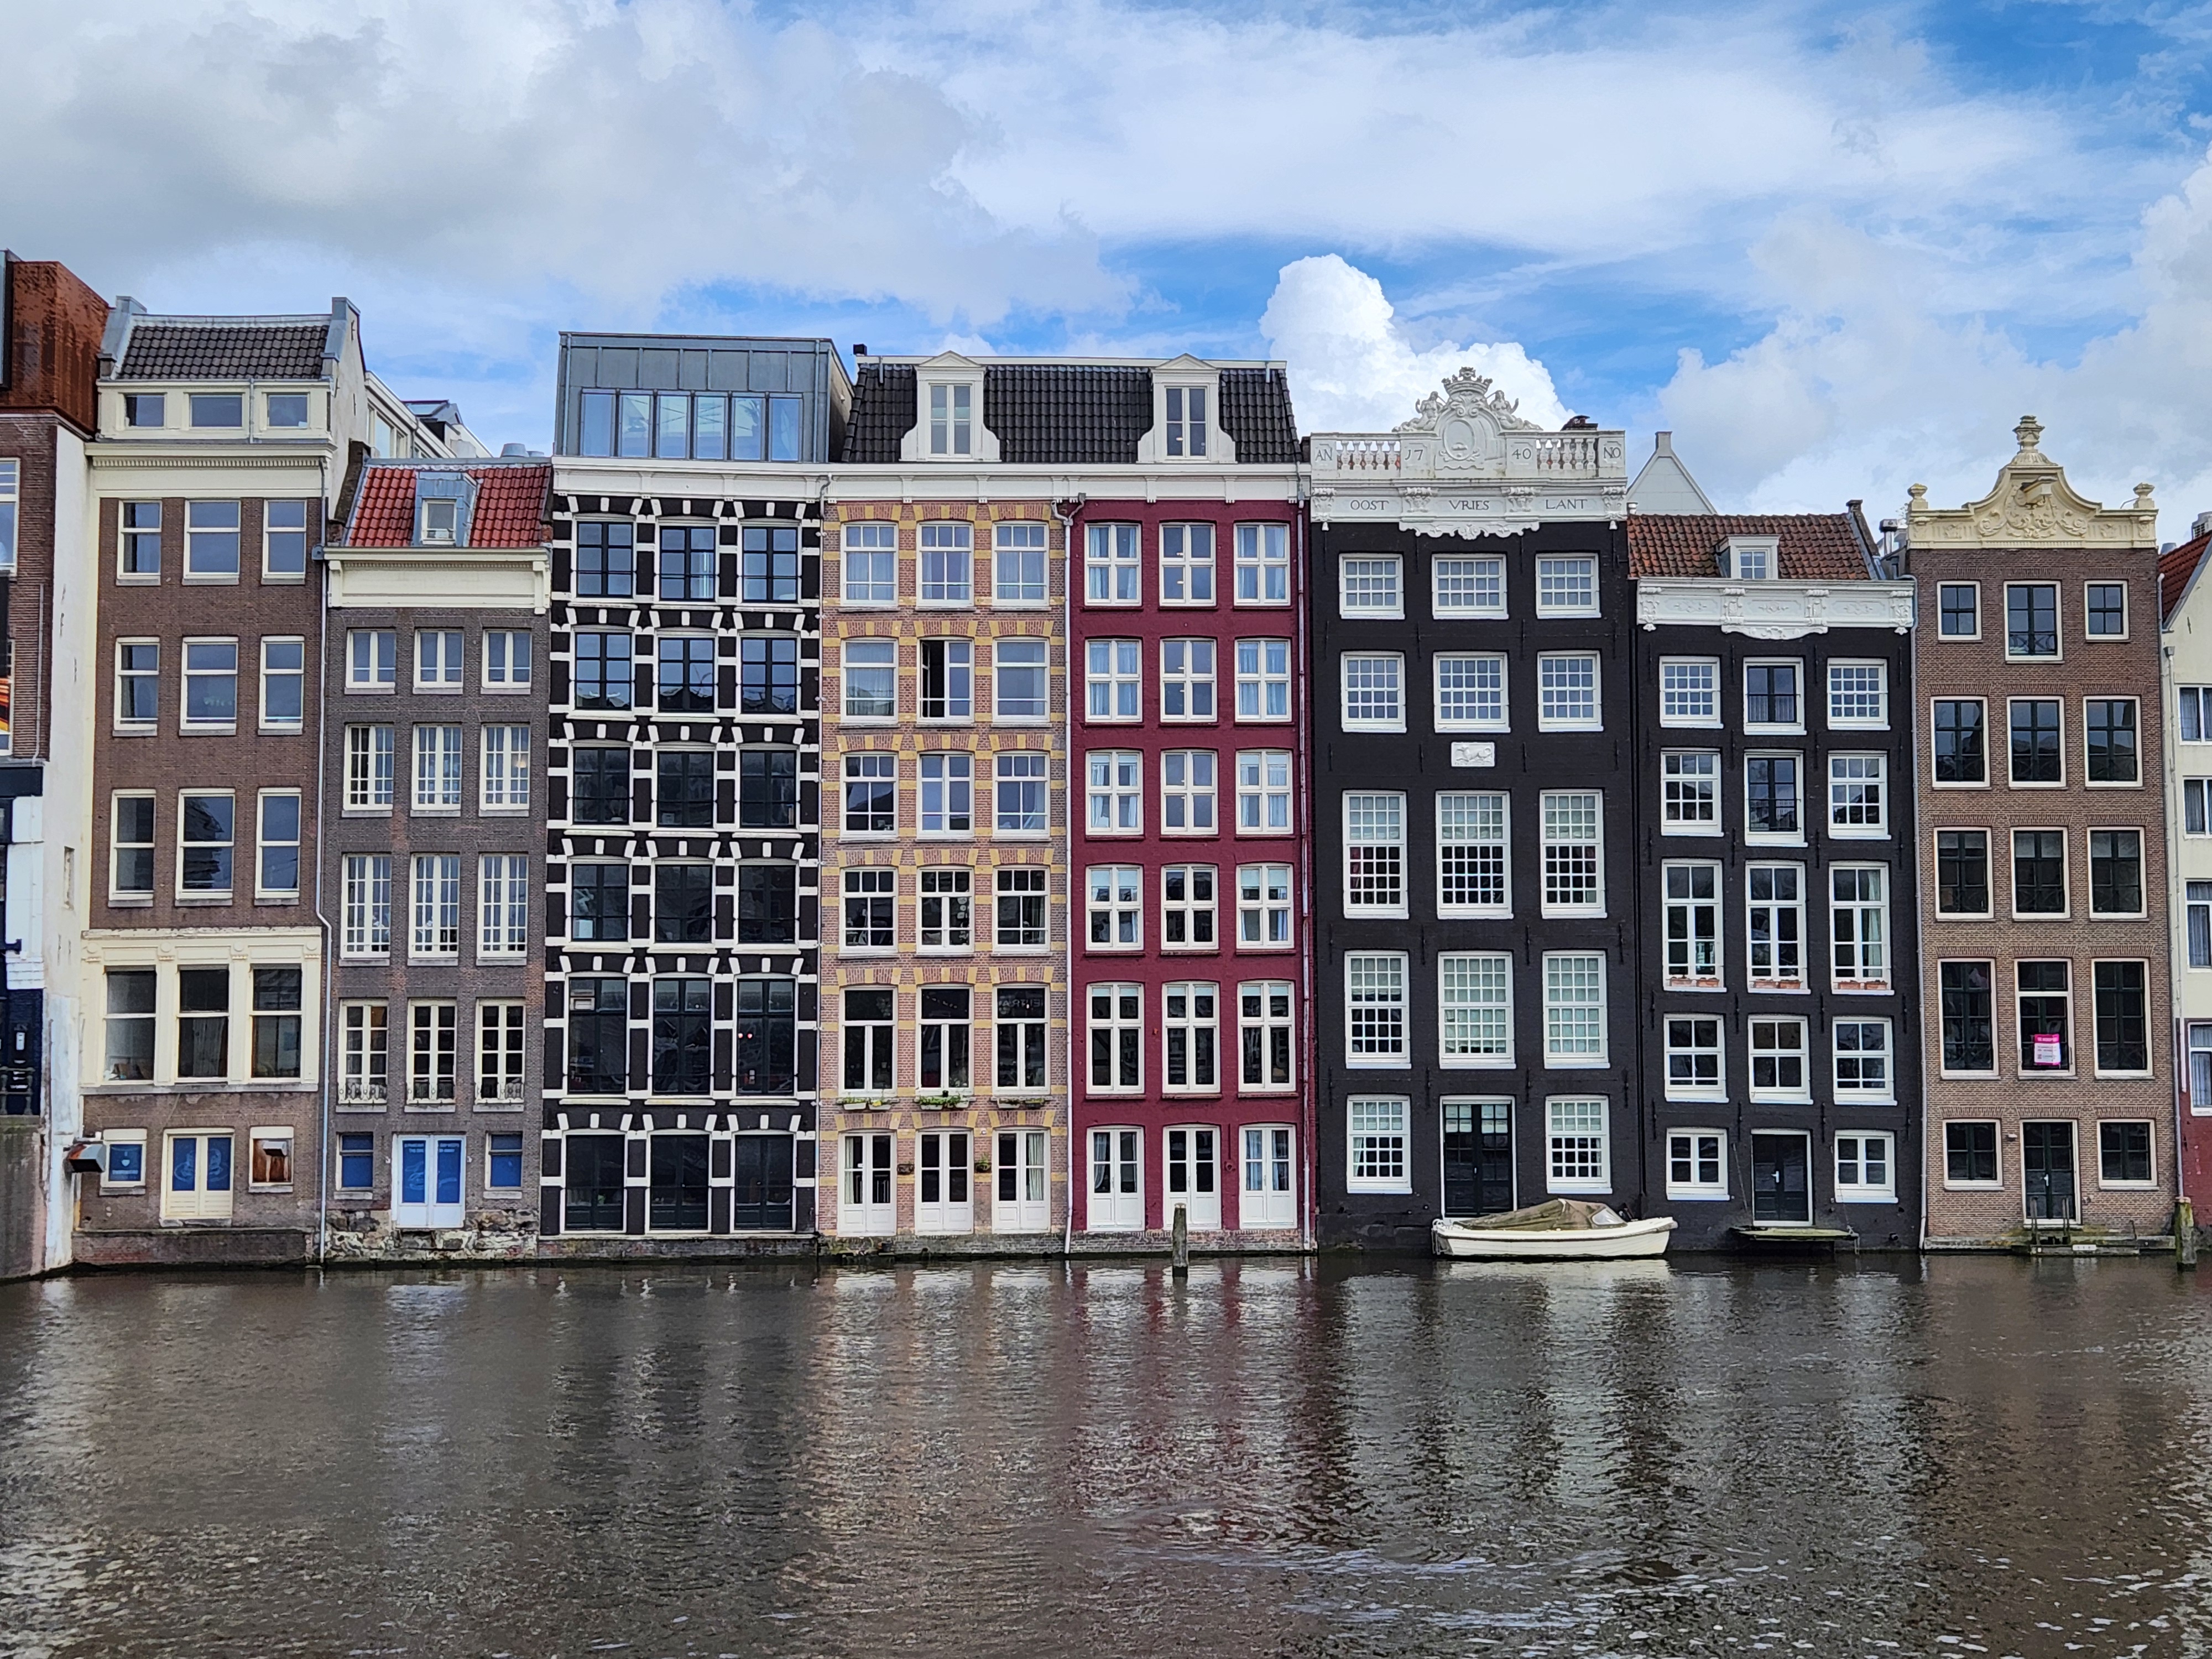 Classic Amsterdam shot of the narrow houses along the canal